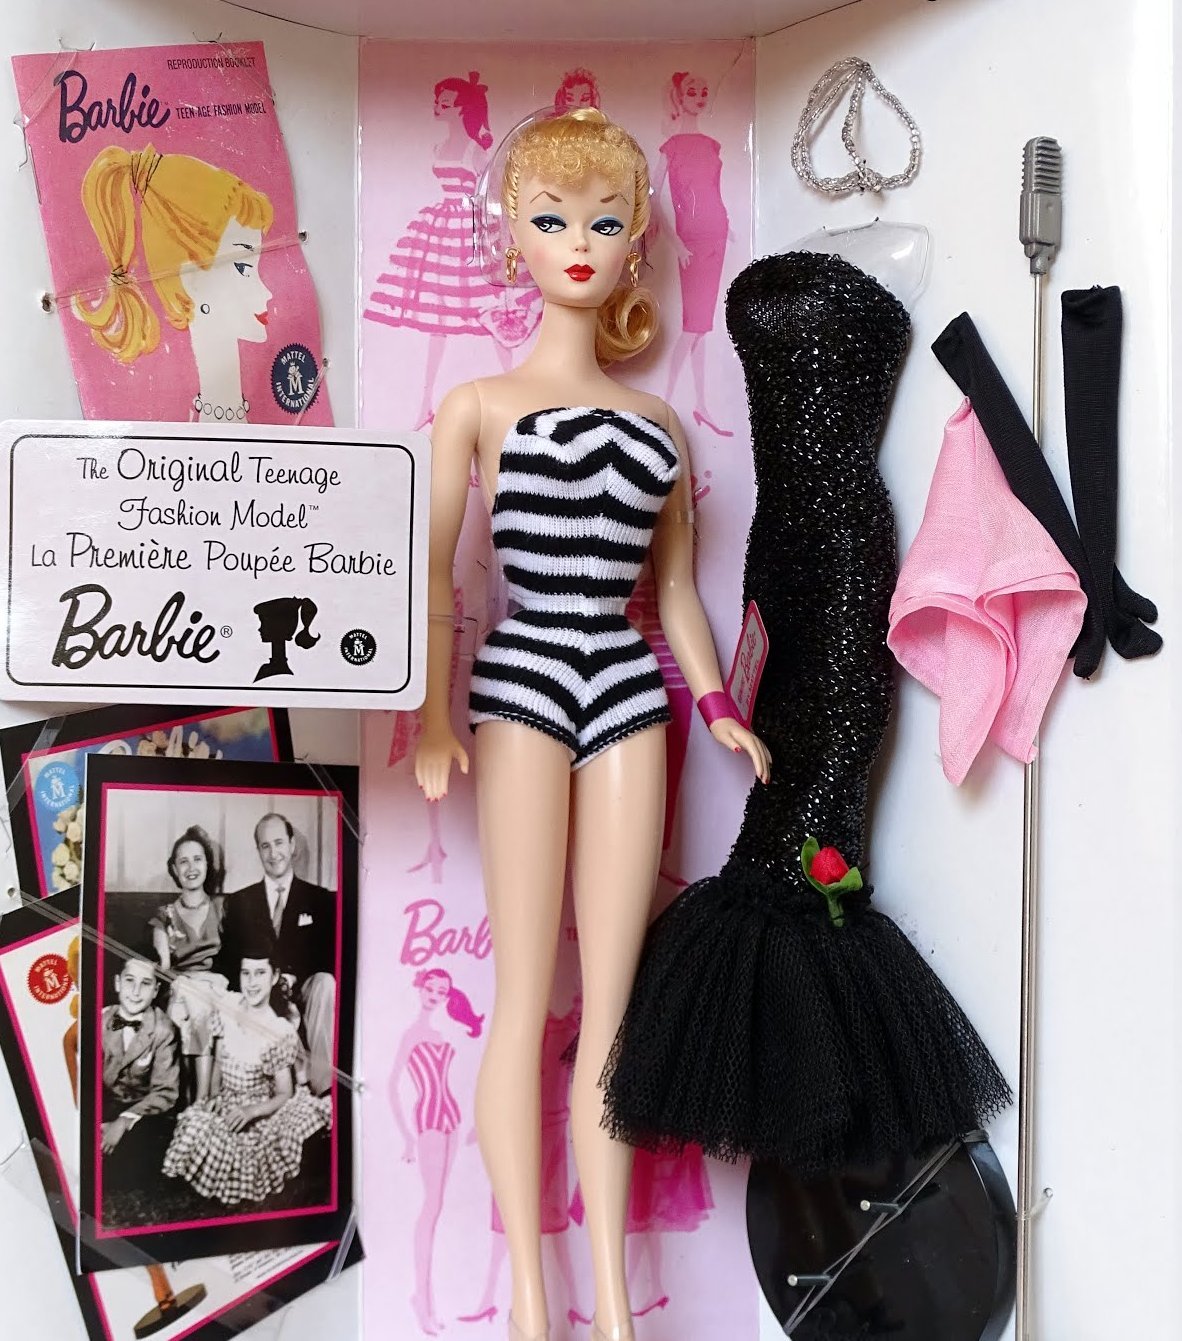 1994 – 2023 ~ Vintage Barbie, Familiy and Friends Reproductions.  Barbie  Doll, friends and family history and news. From 1959 to the present